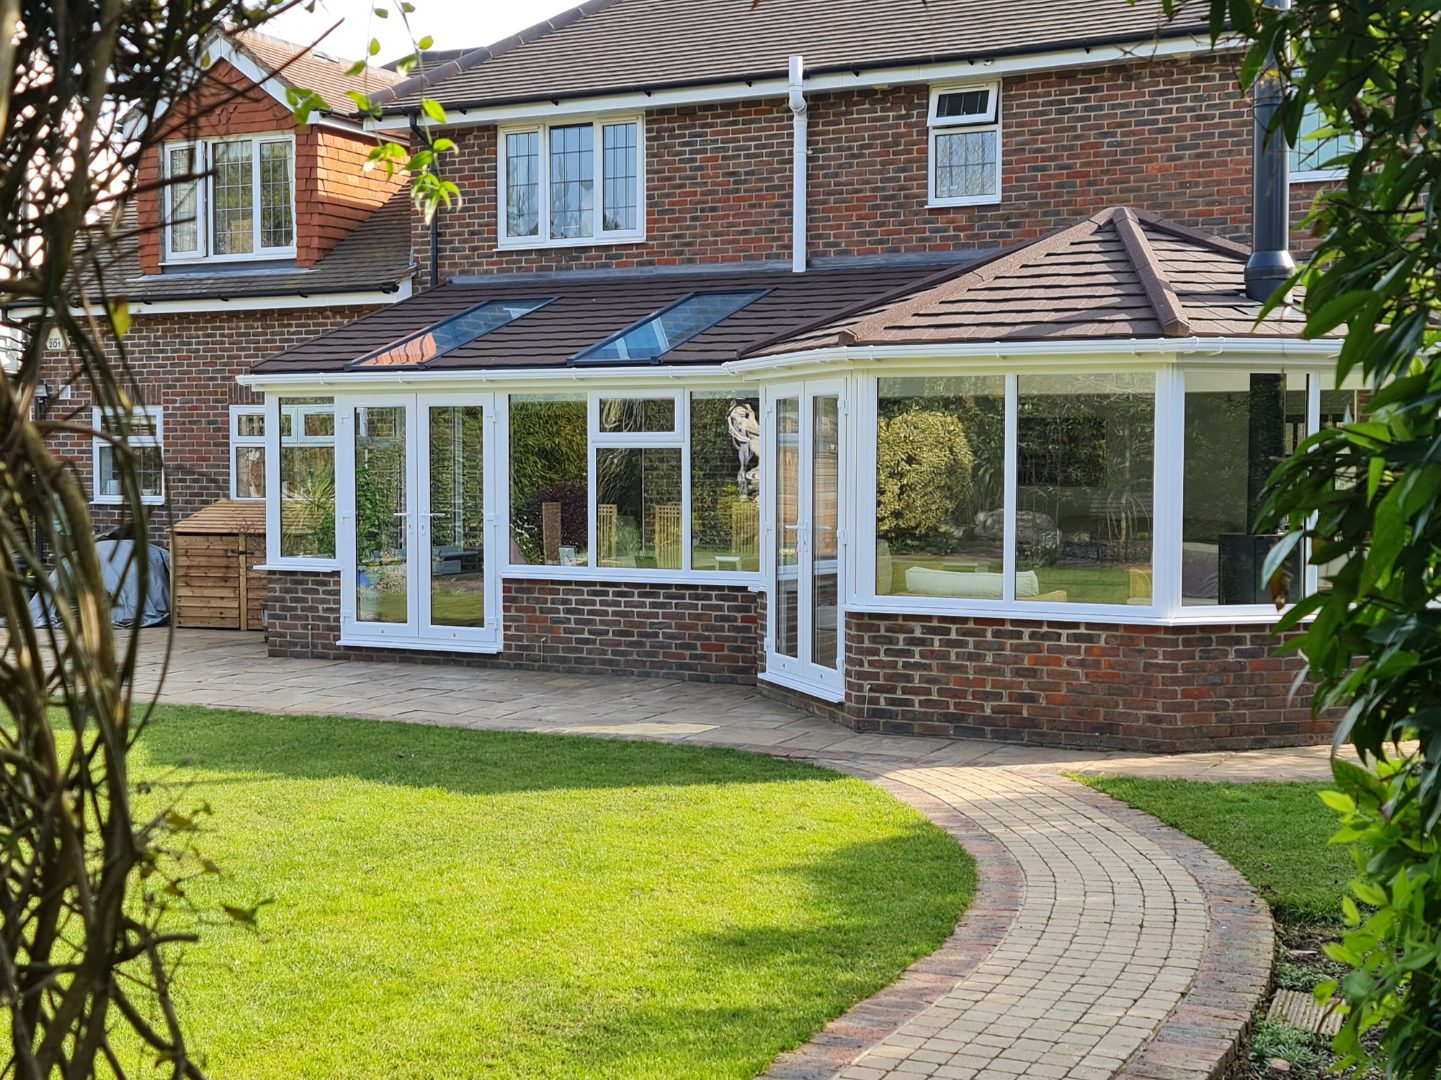 Modern replacement conservatory roof in the North East, showcasing a sleek, updated design with durable materials, enhancing the conservatory's appearance and functionality.